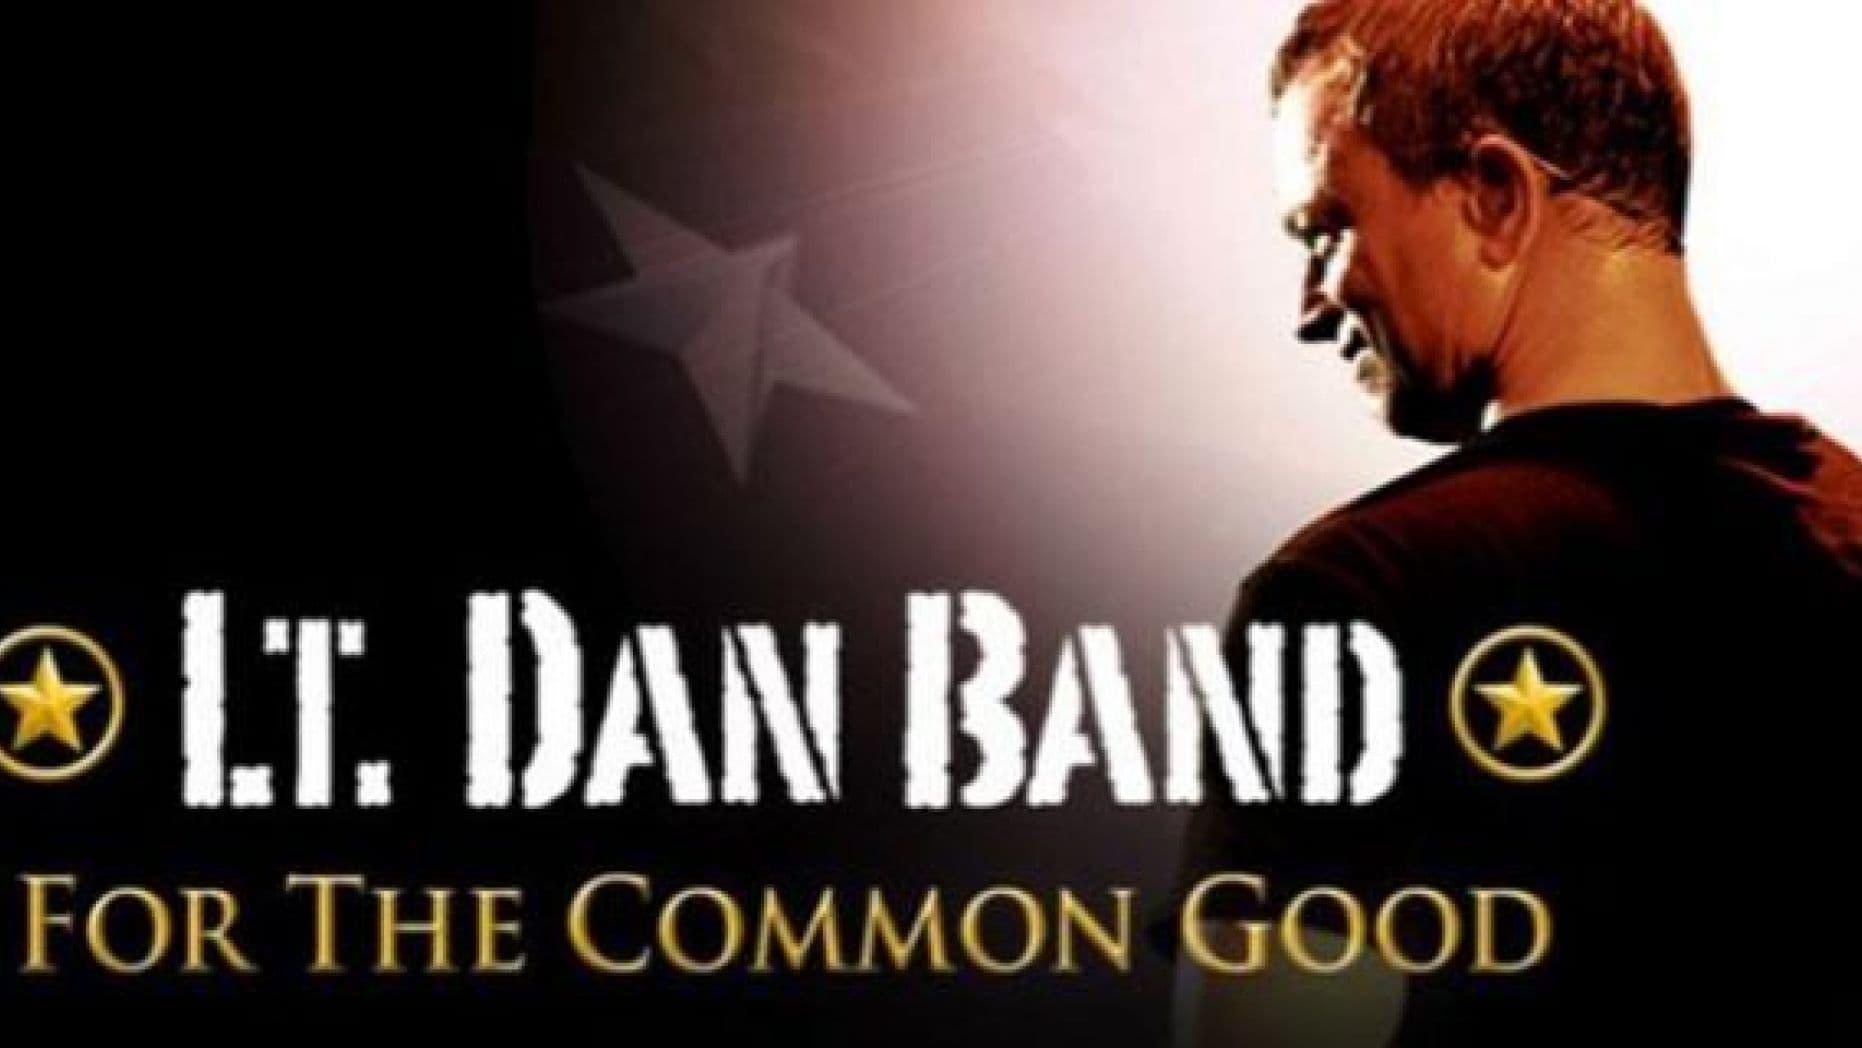 Lt. Dan Band: For the Common Good backdrop